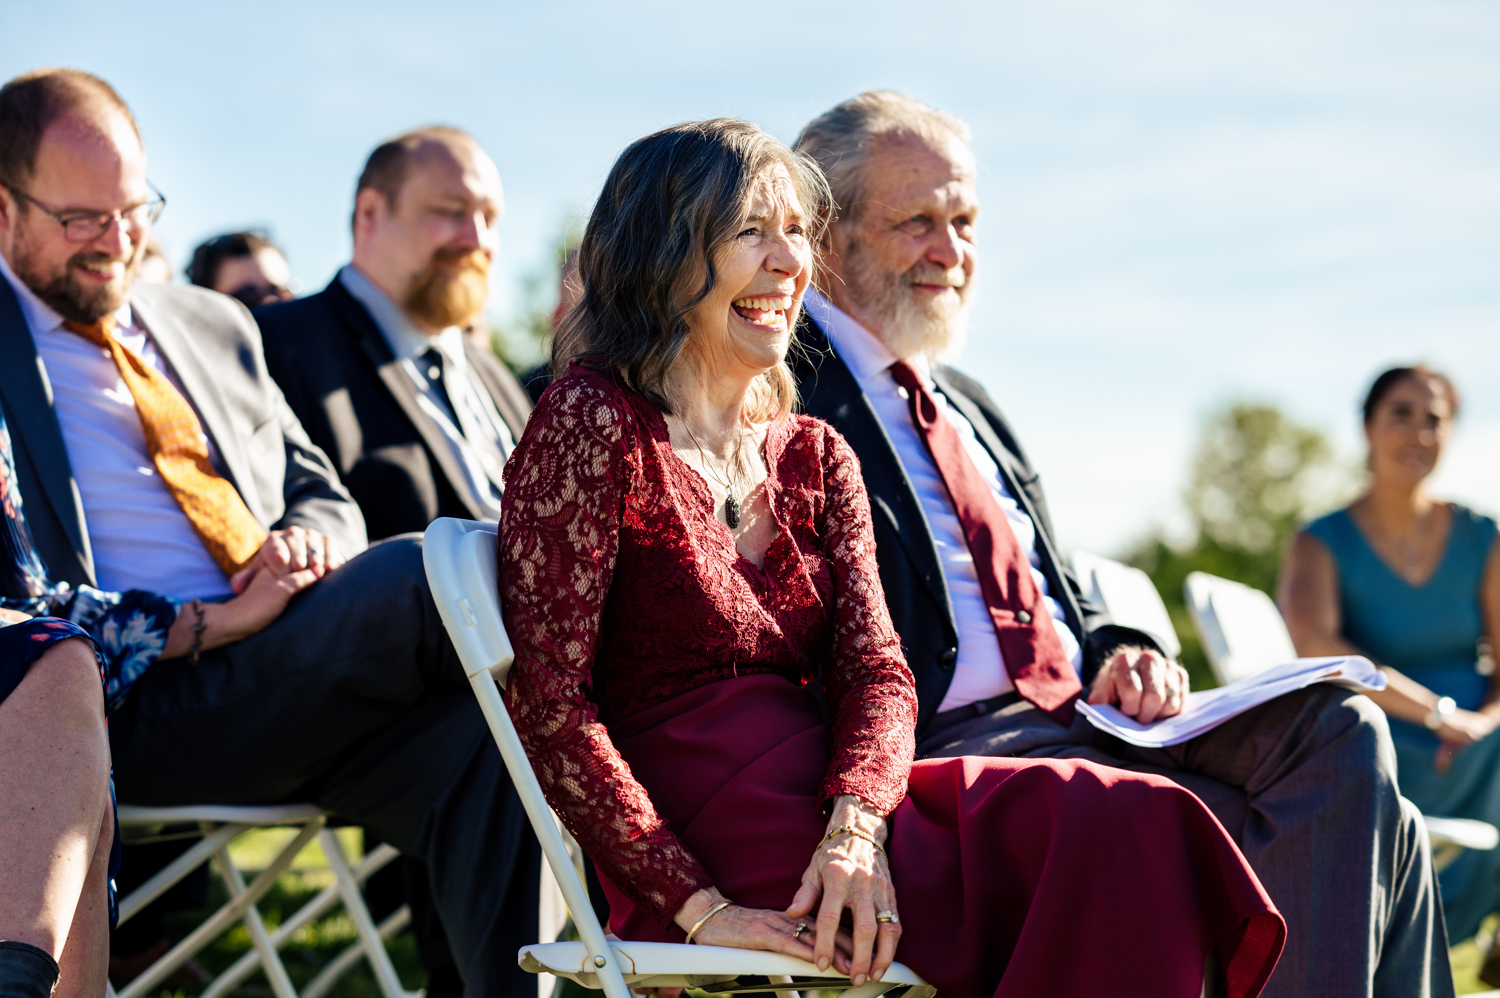 Guests laughing delightedly during wedding ceremony in East Burke, Vermont.